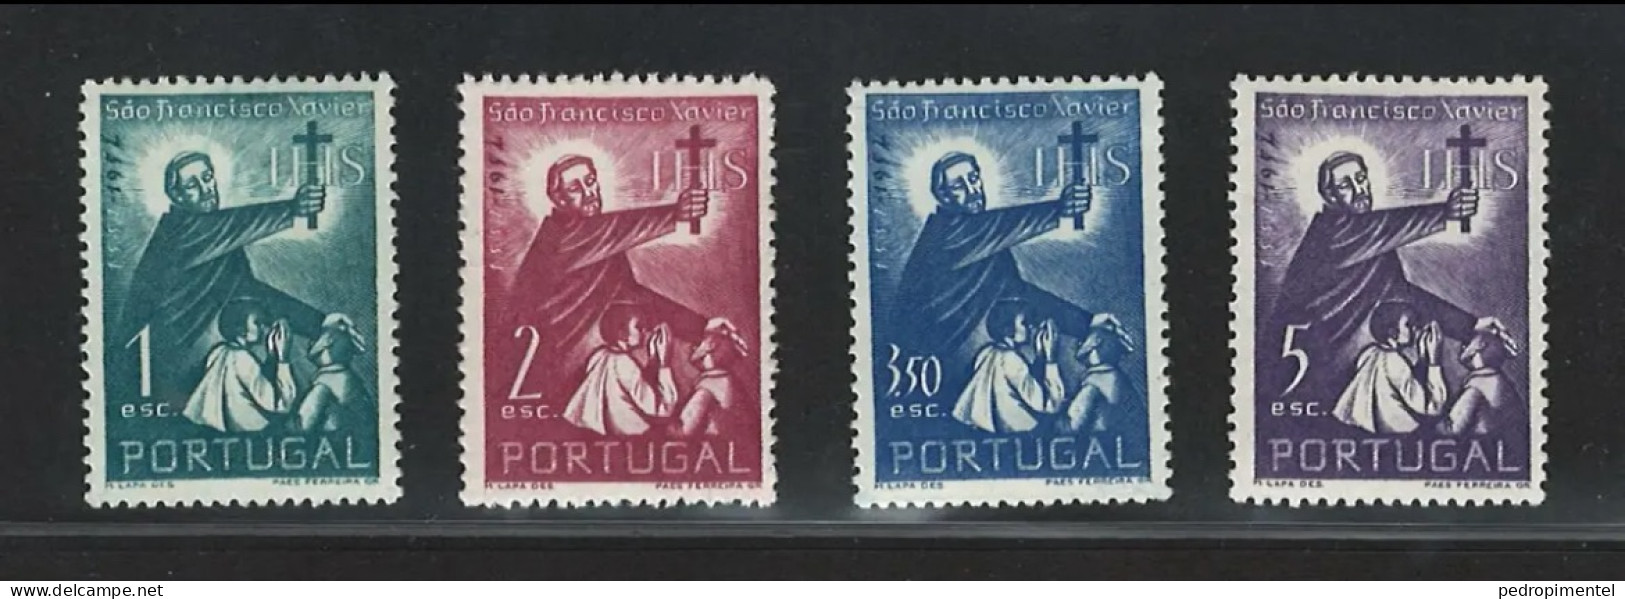 Portugal Stamps 1952 "Saint Francis" Condition MH OG #691-694 - Nuevos